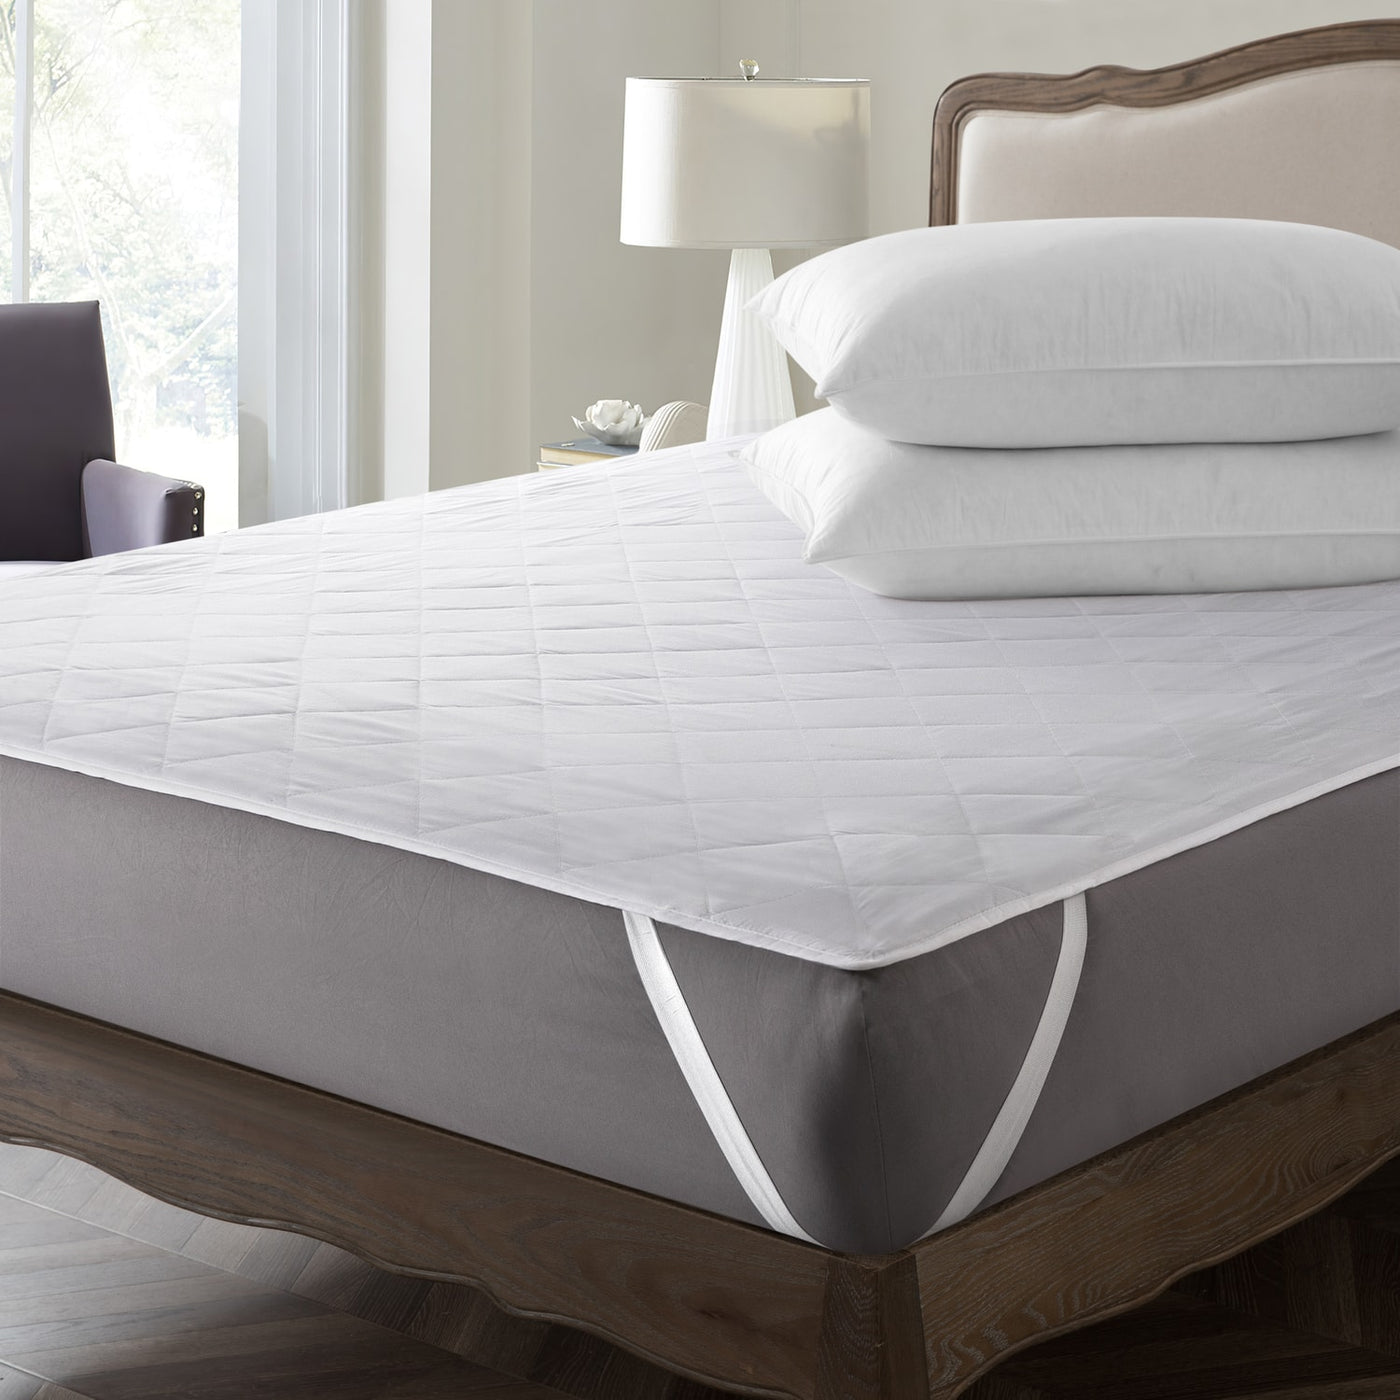 Single Size Quilted Mattress Protector